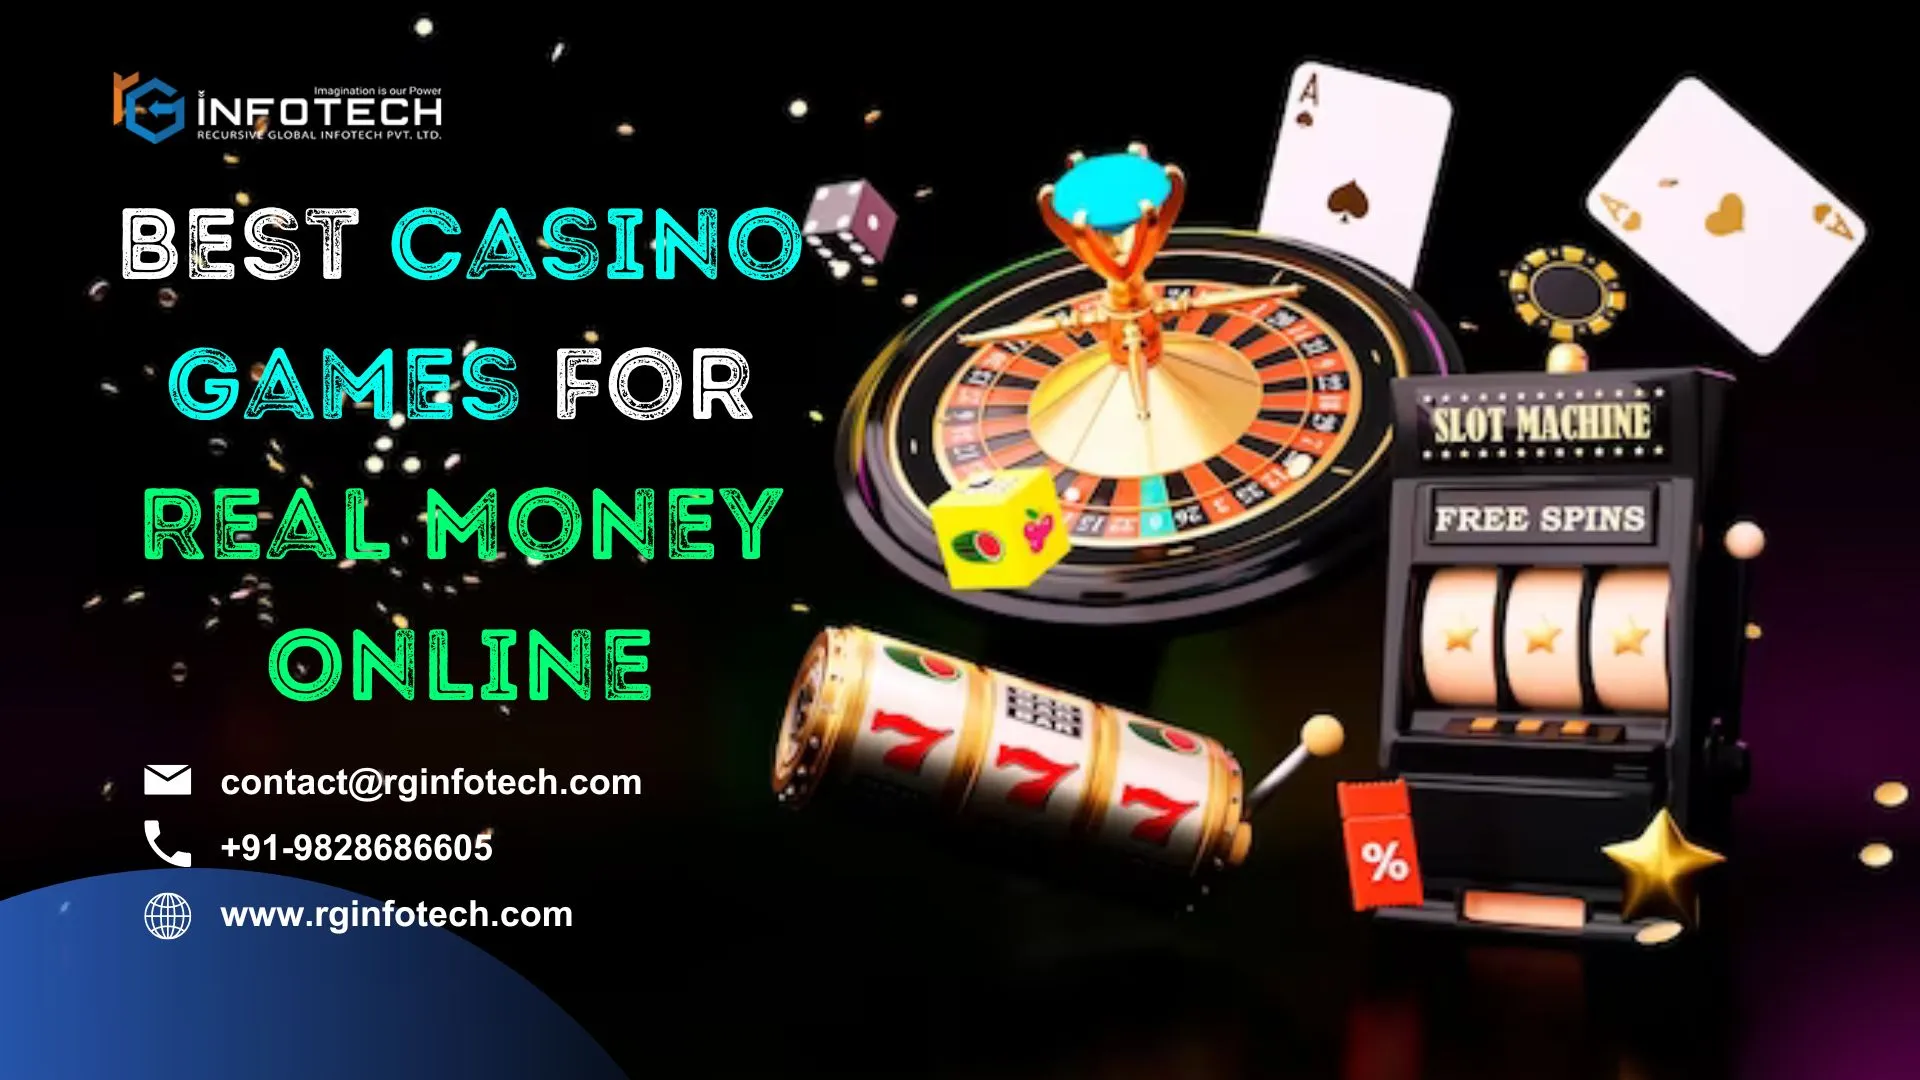 Casino Games for Real Money Online